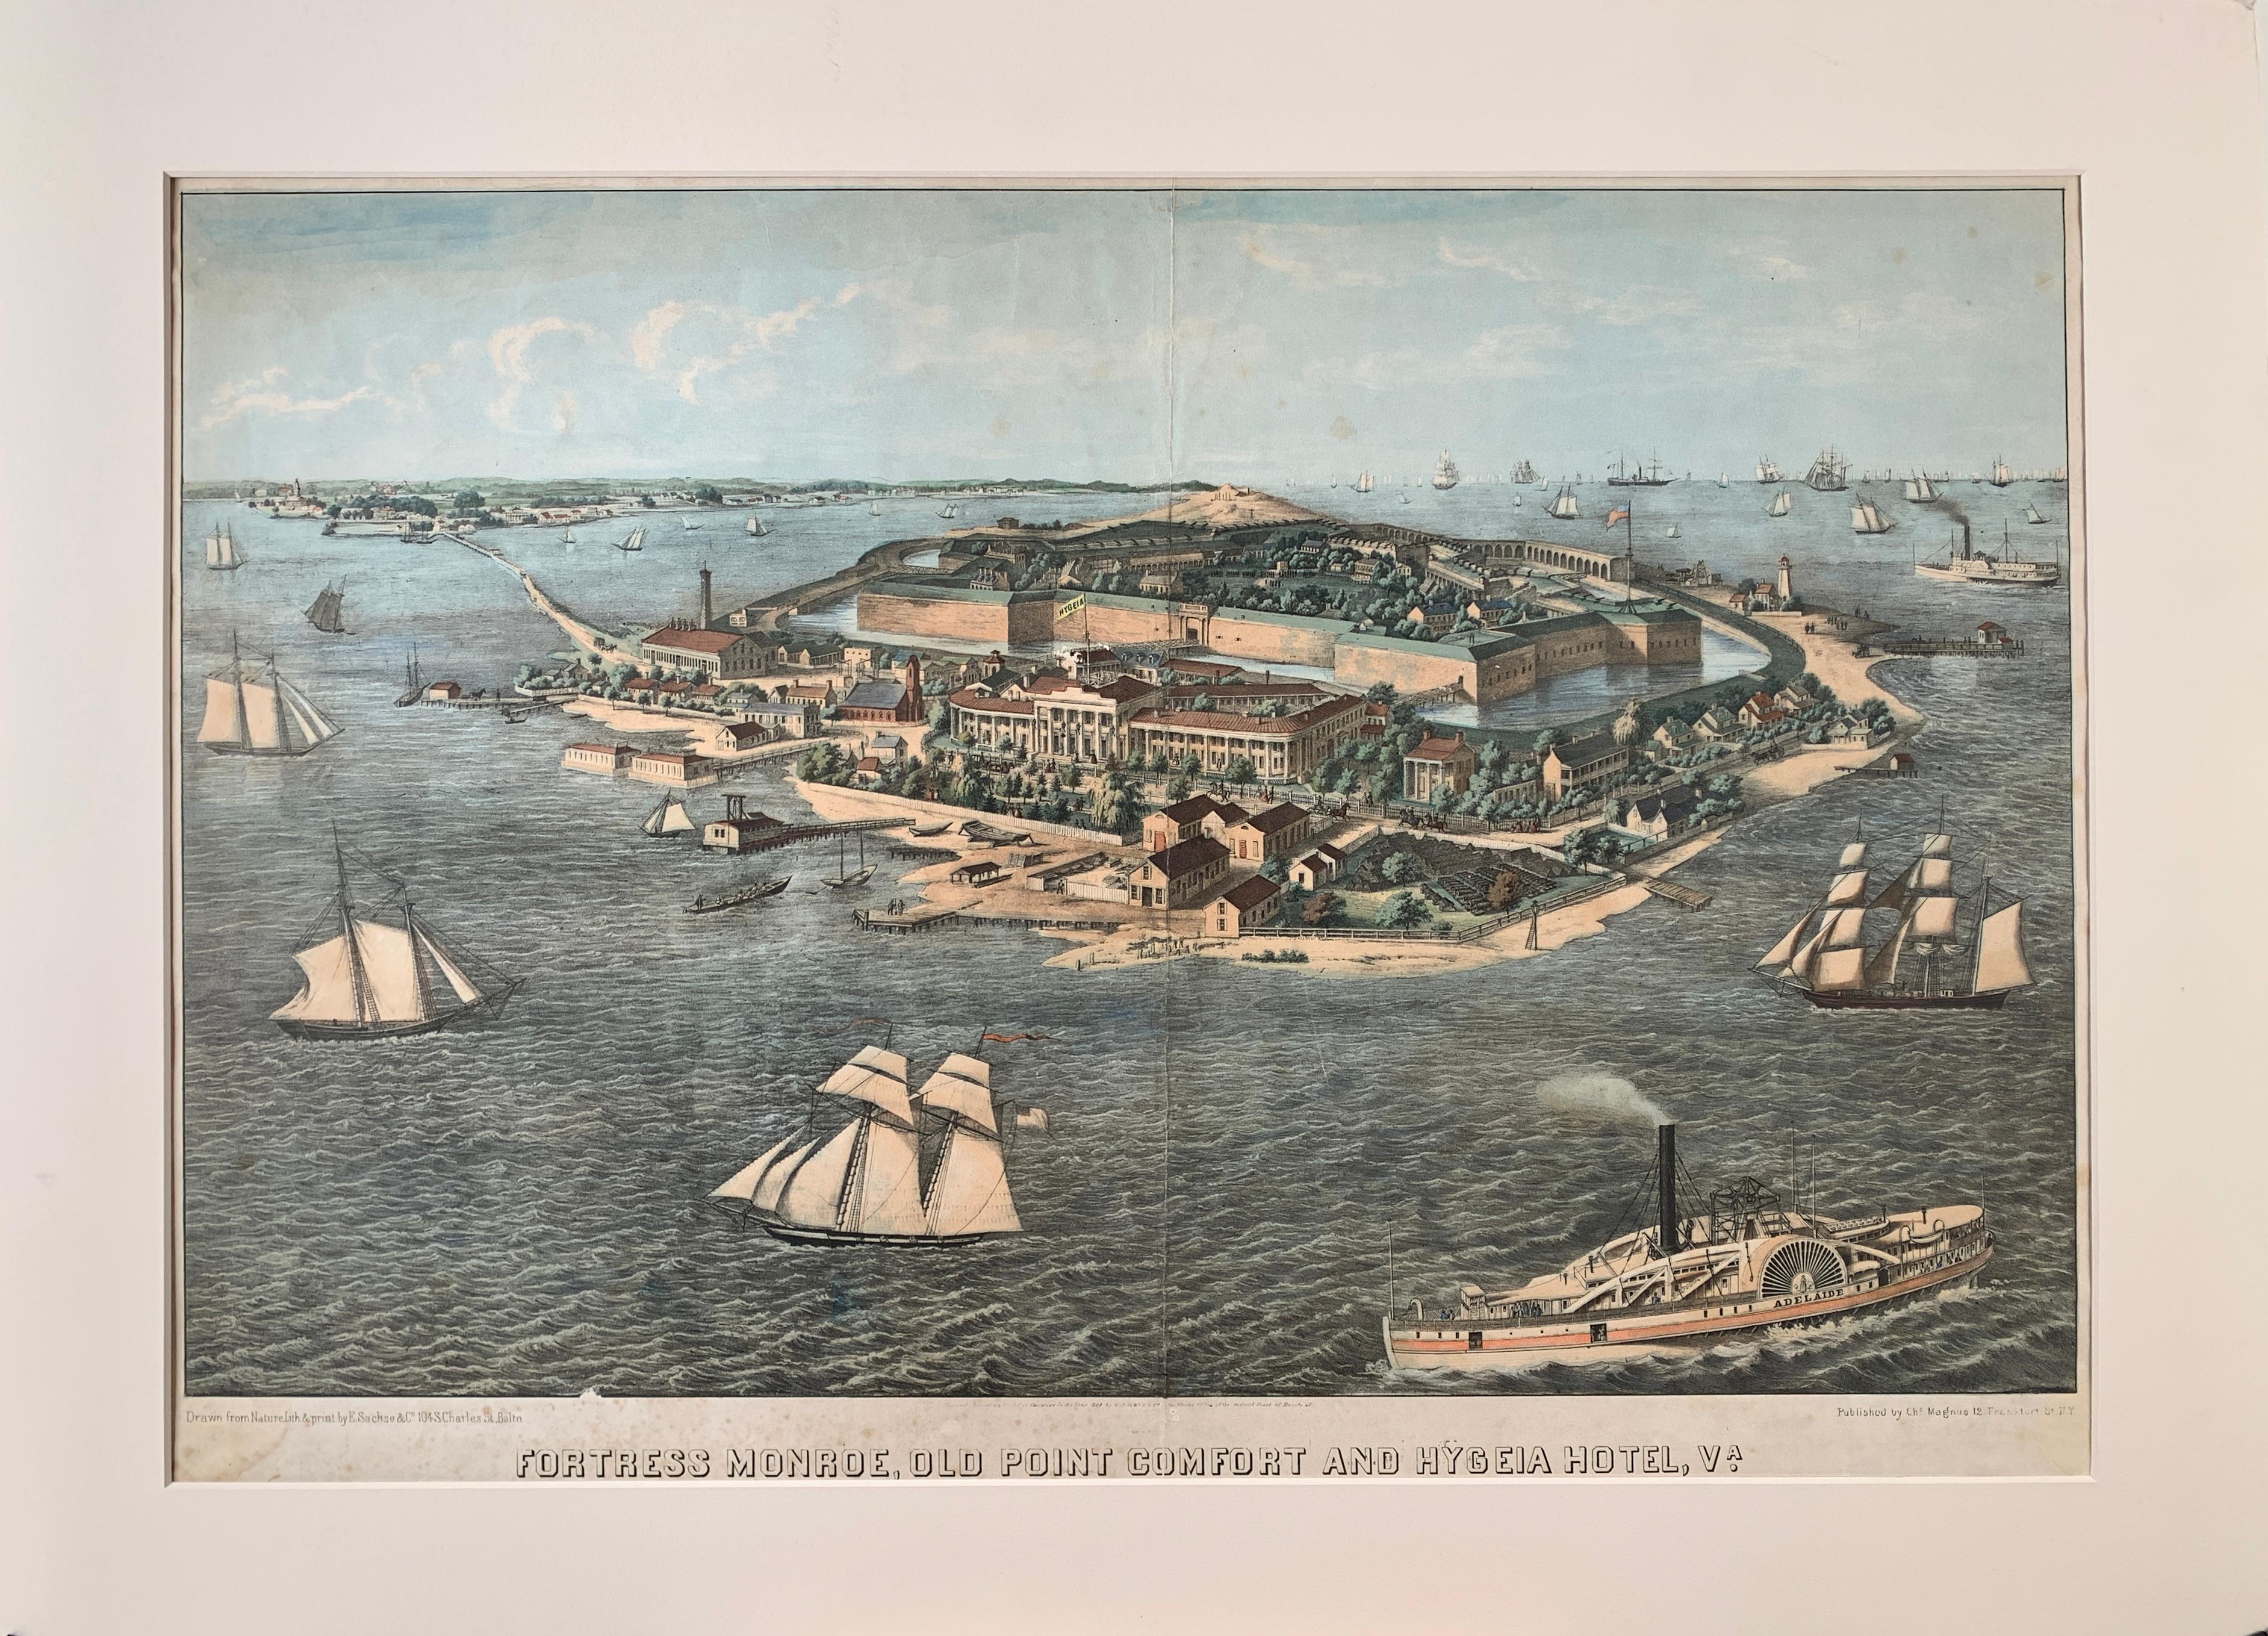 Edward Sachse Landscape Print - Fortress Monroe, Old Point Comfort and Hygeia Hotel, VA